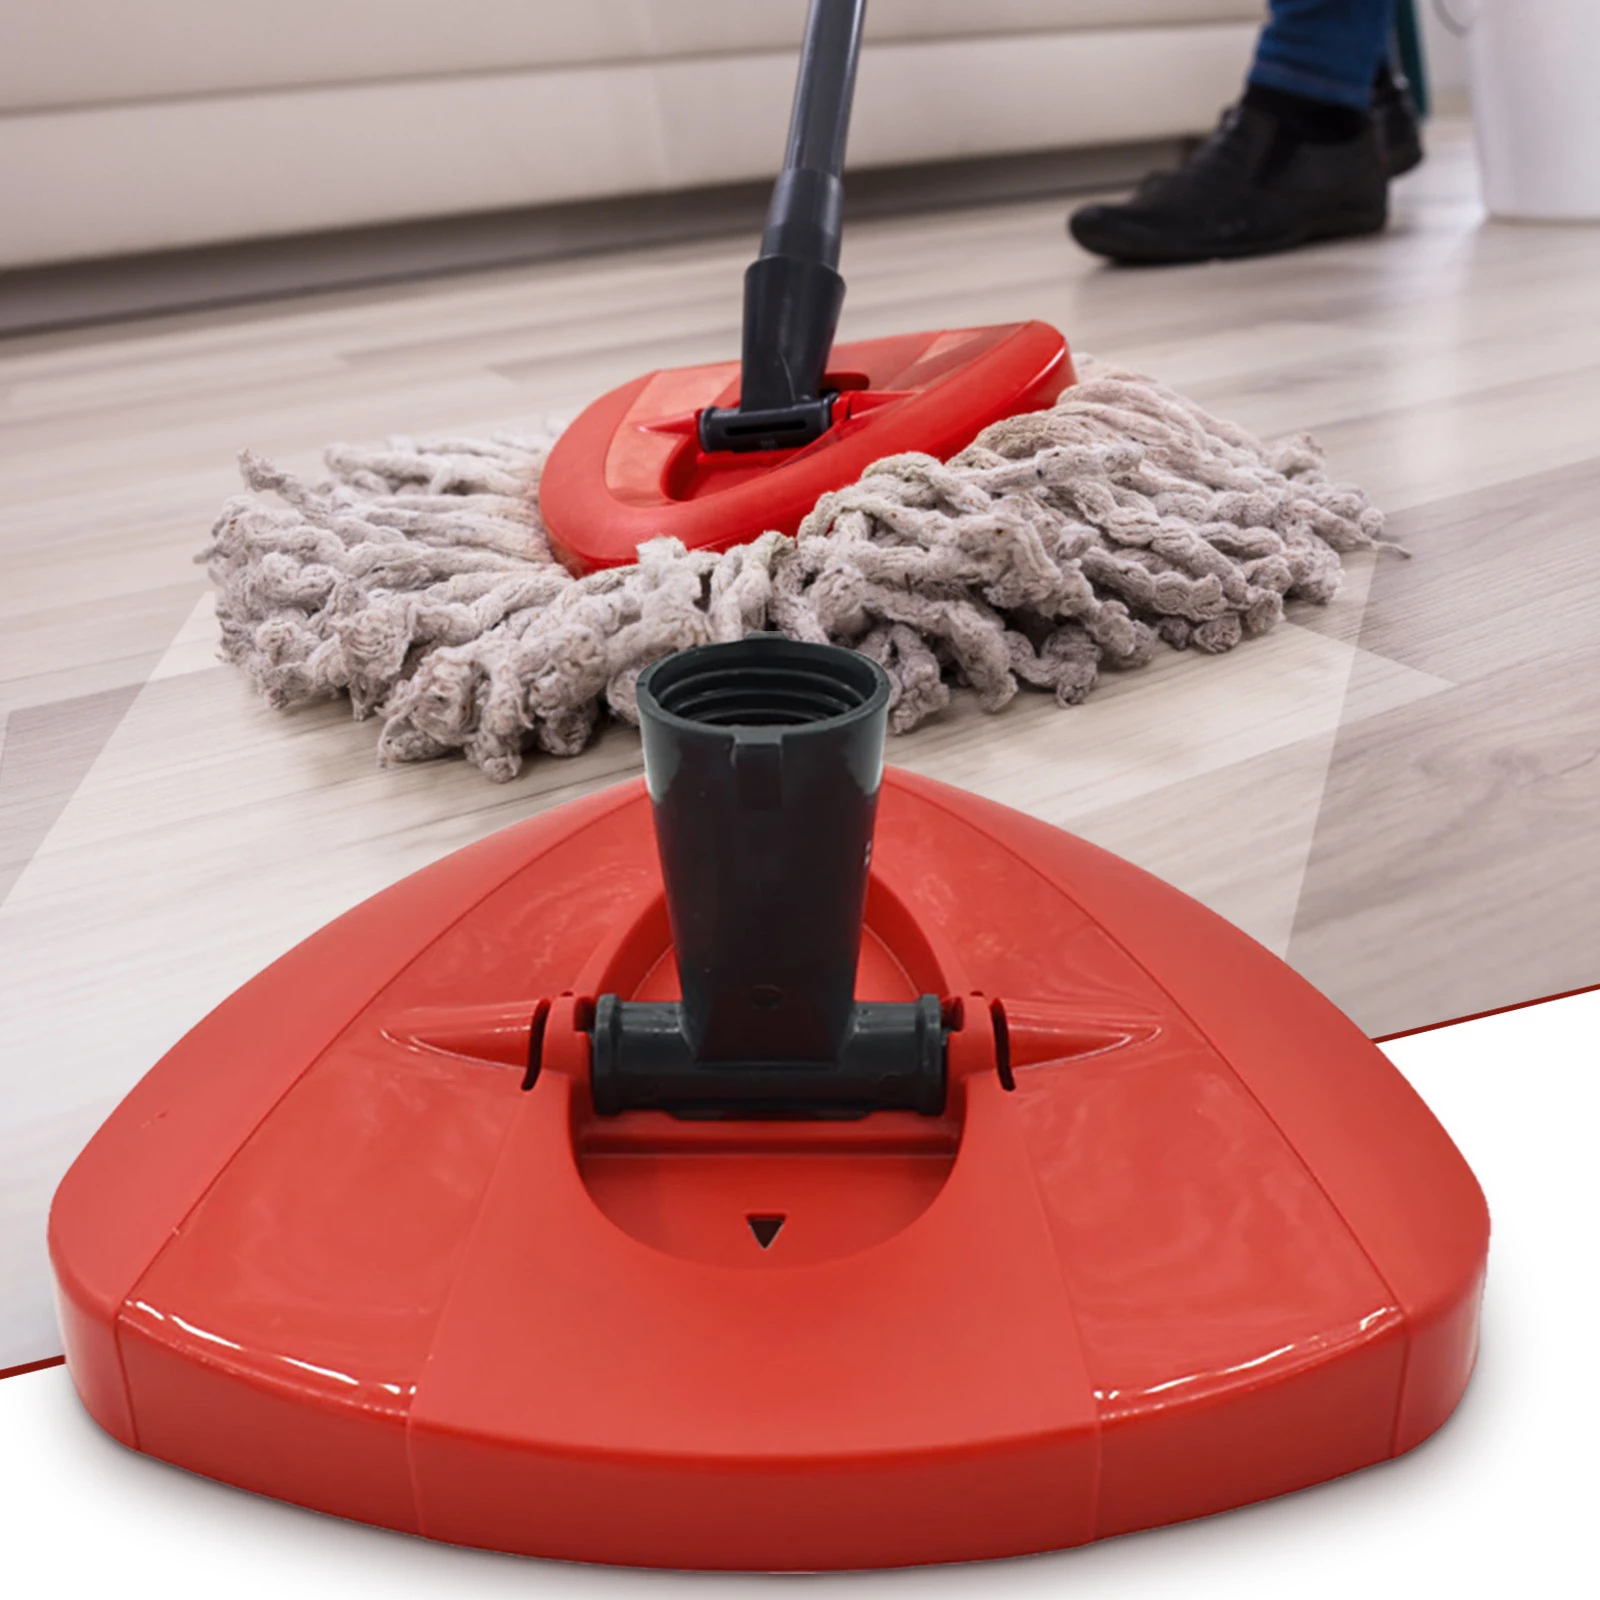 Guggenheim Museum opslaan Stewart Island Spin Mop Replacement Head Disc Mop Head Plate Plastic Triangles Plate For  Accessories Of Rotating Mop Base Suitable For Replace - Yard & Lawn Signs -  AliExpress